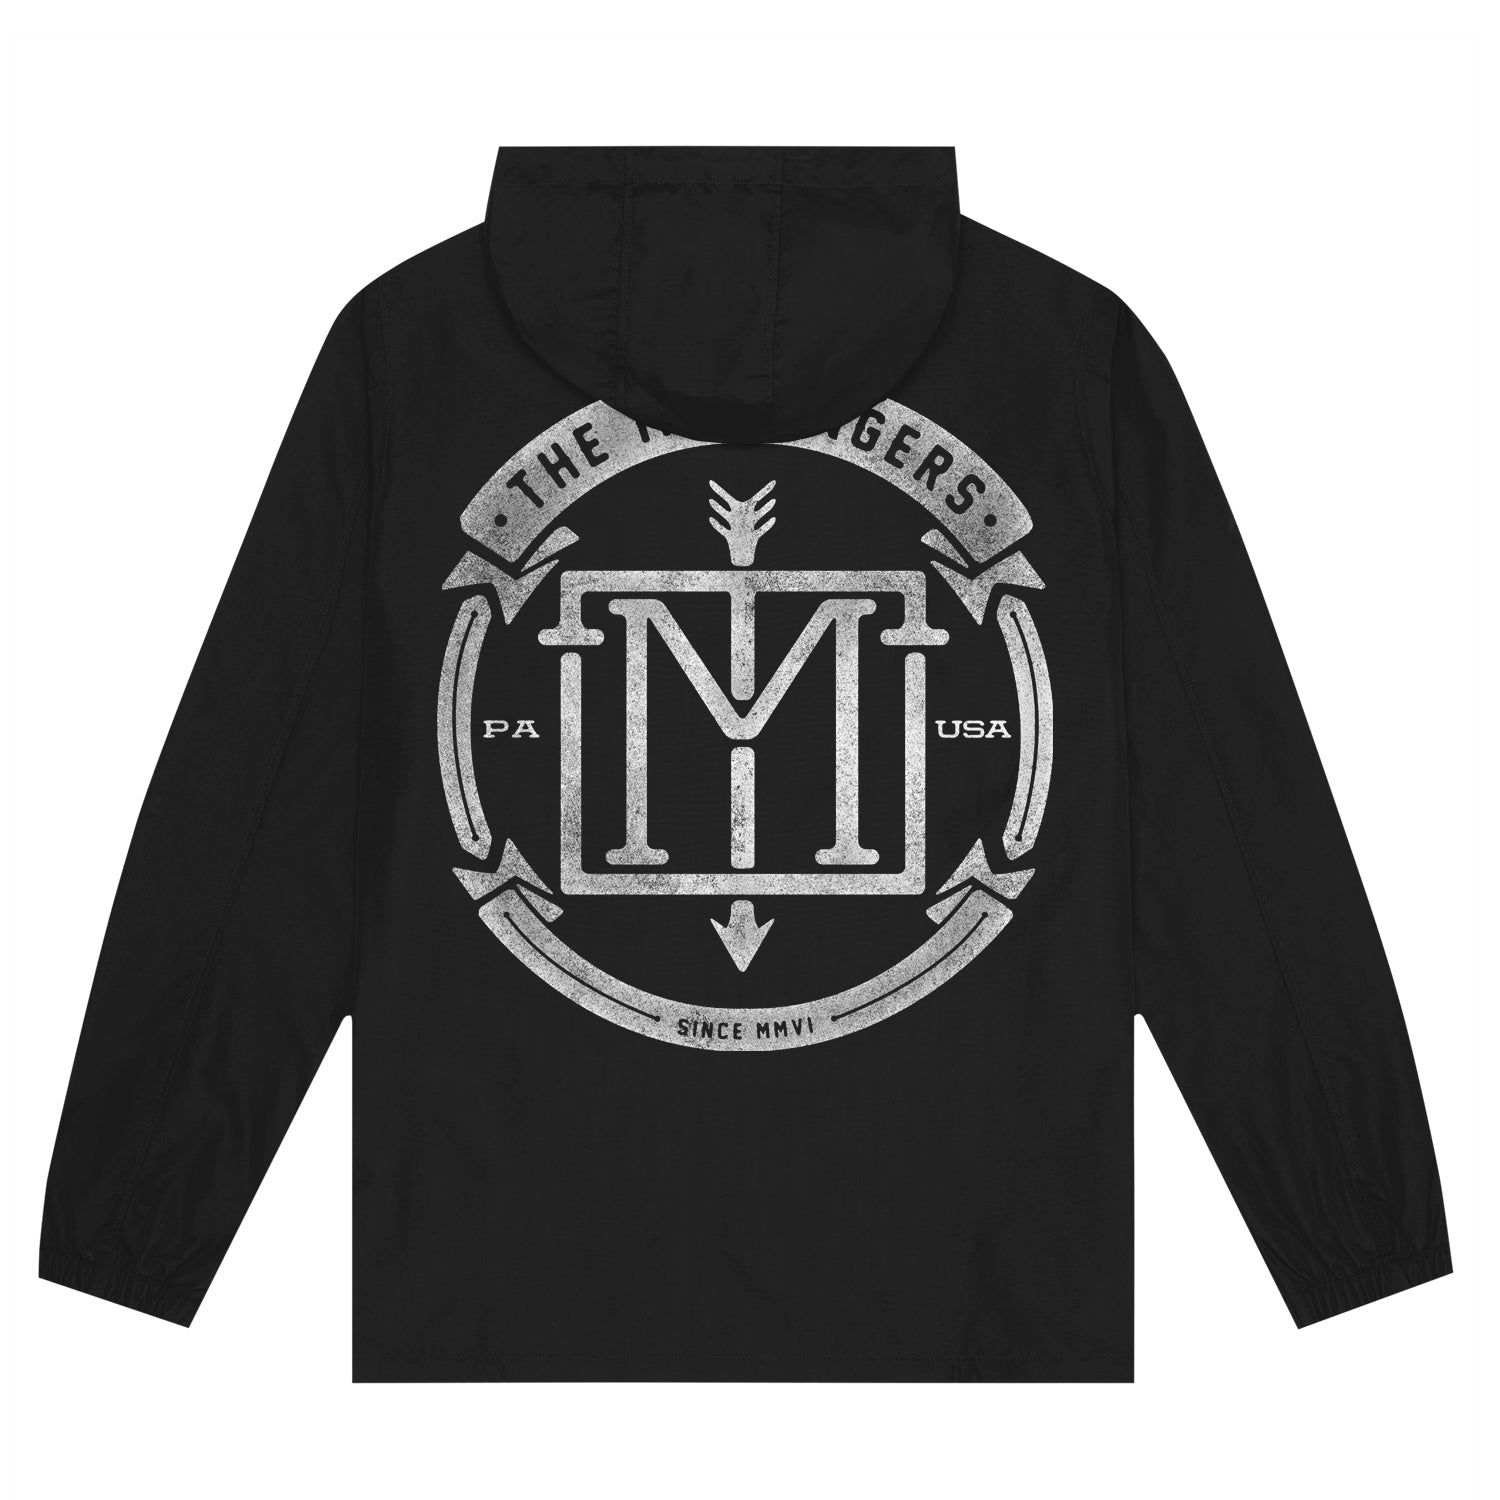 image of the back of a black pullover windbreaker jacket on a white background. the back of the jacket has a full back print in whiteof a circle with the menzingers emblem logo in the center. it also says in arched text at the top the menzingers